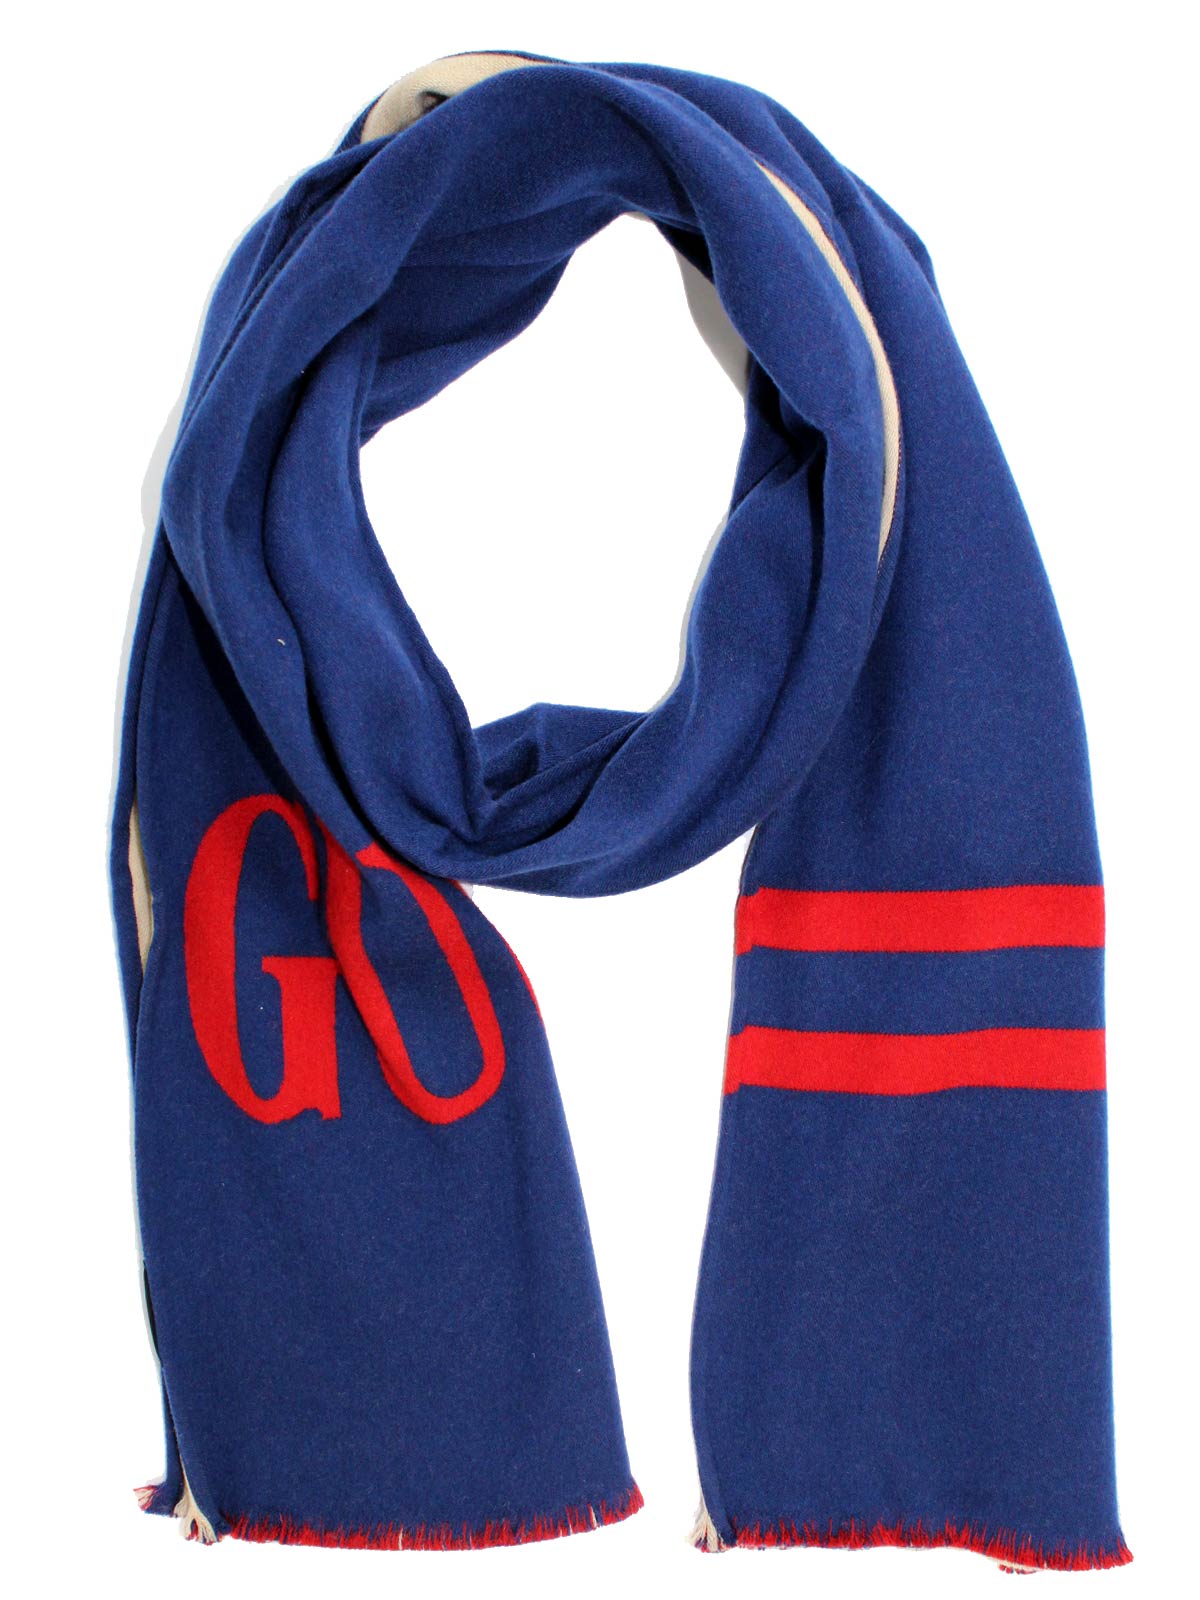 Gucci Vintage - GG Web Wool Scarf - Brown Red - Wool and Silk